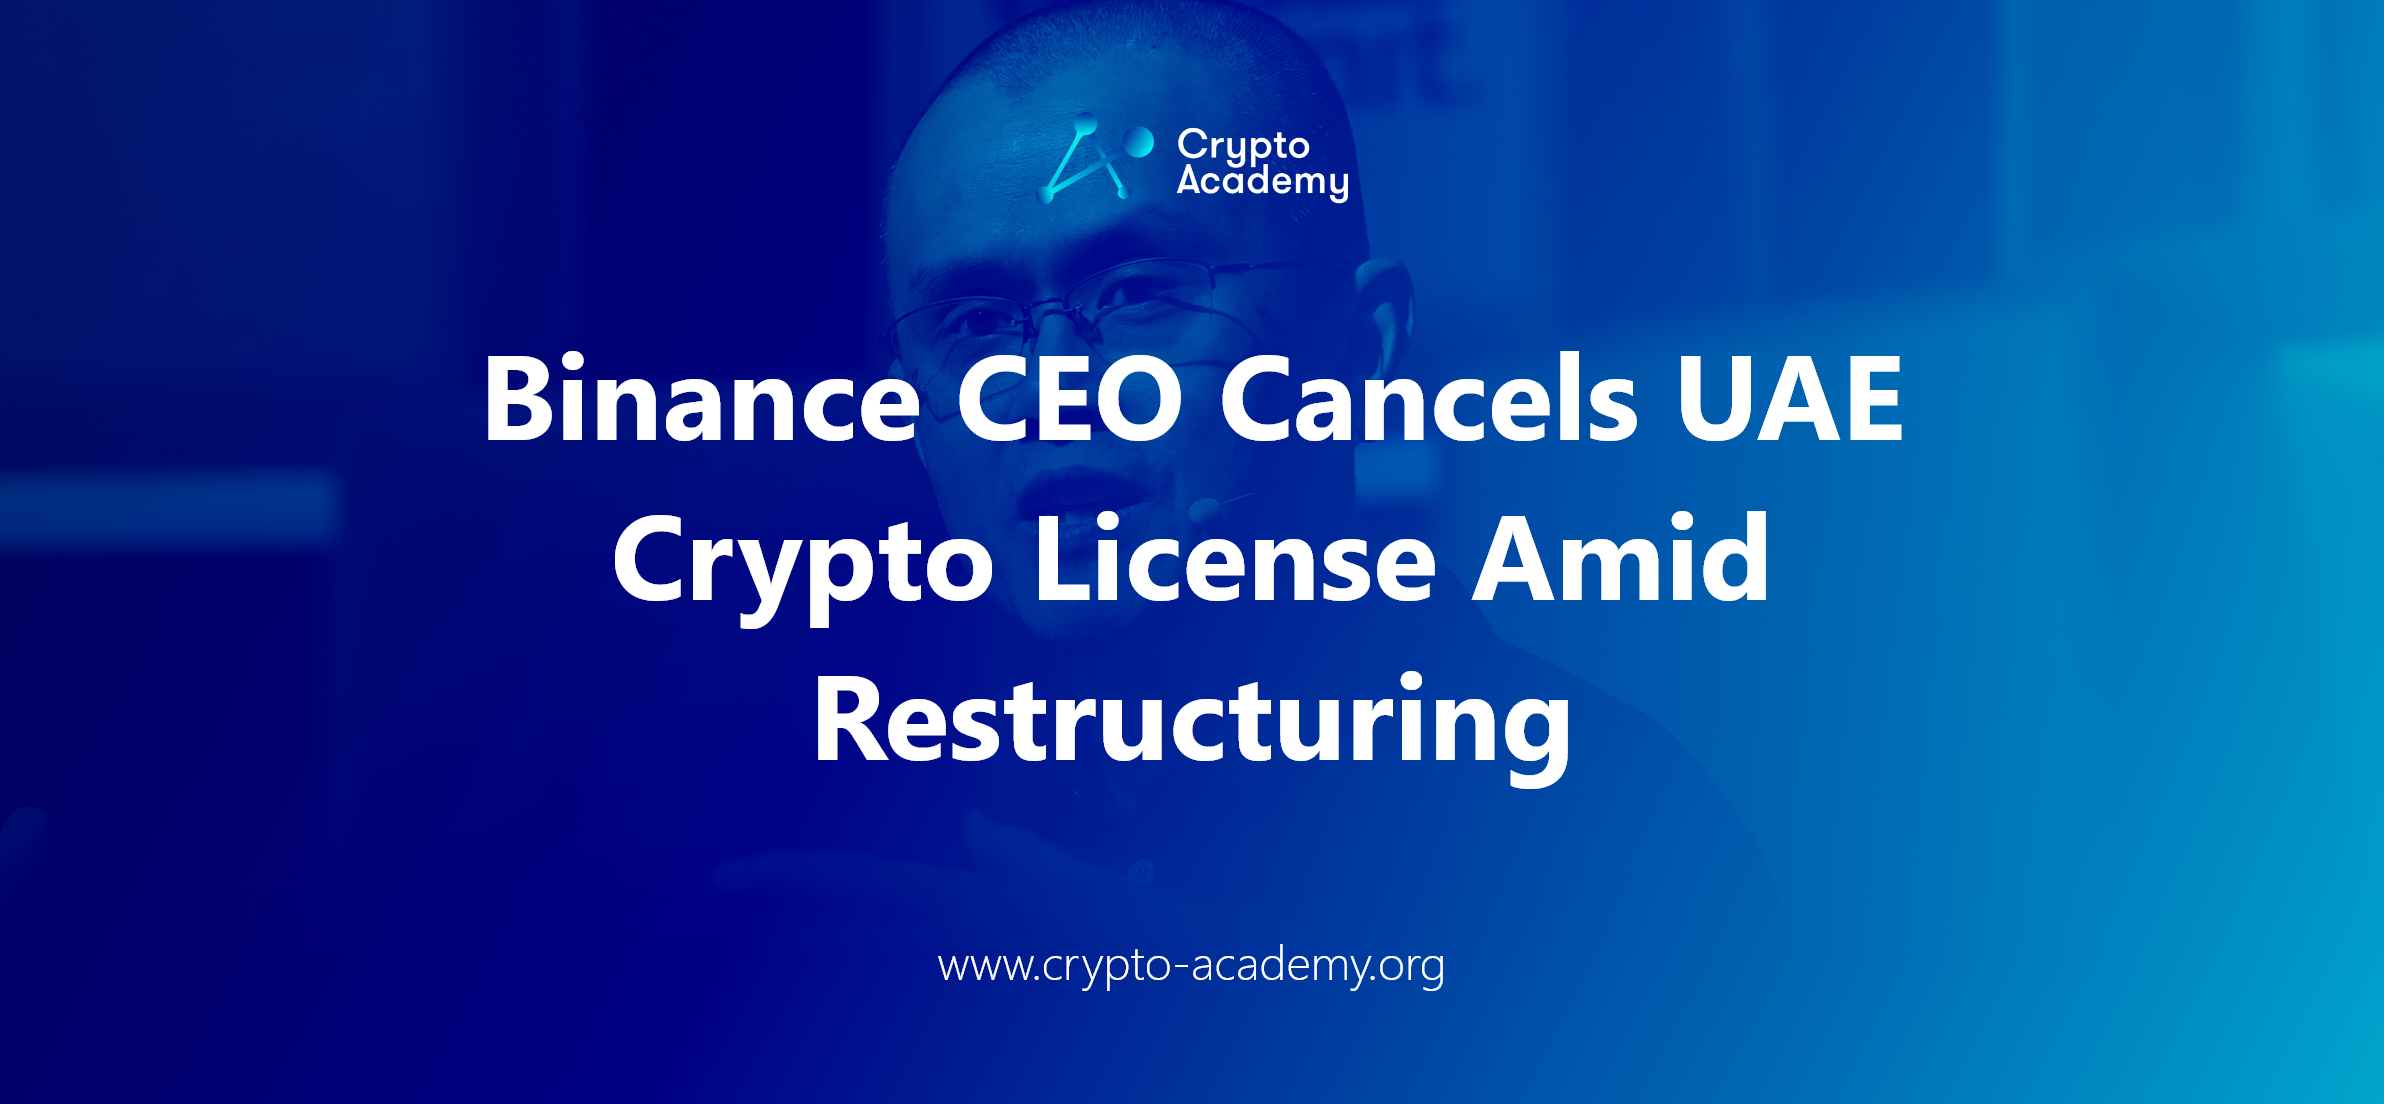 Binance CEO Cancels UAE Crypto License Amid Restructuring